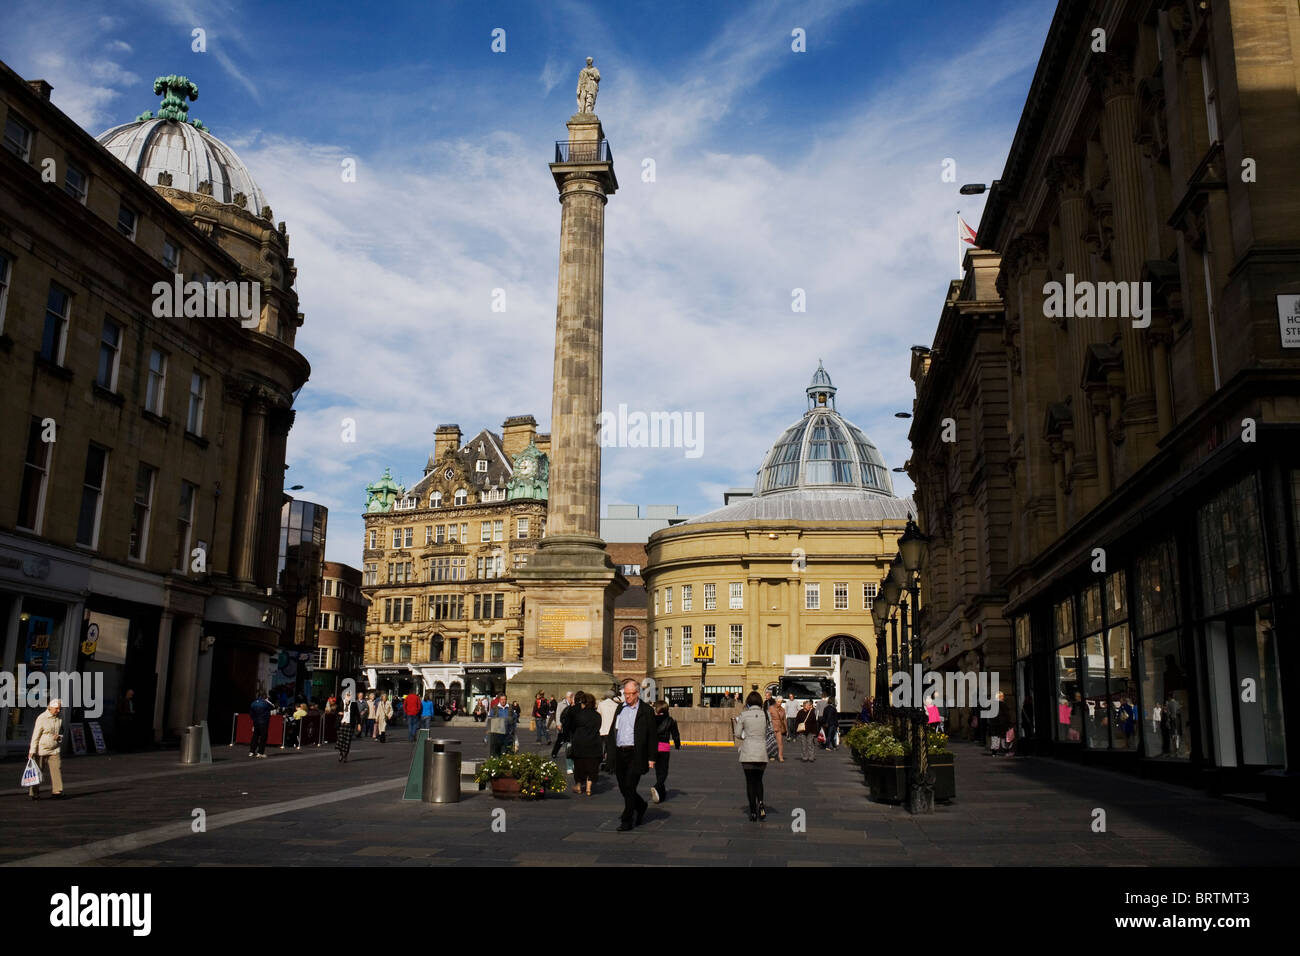 Le Monument, Newcastle upon Tyne. Banque D'Images